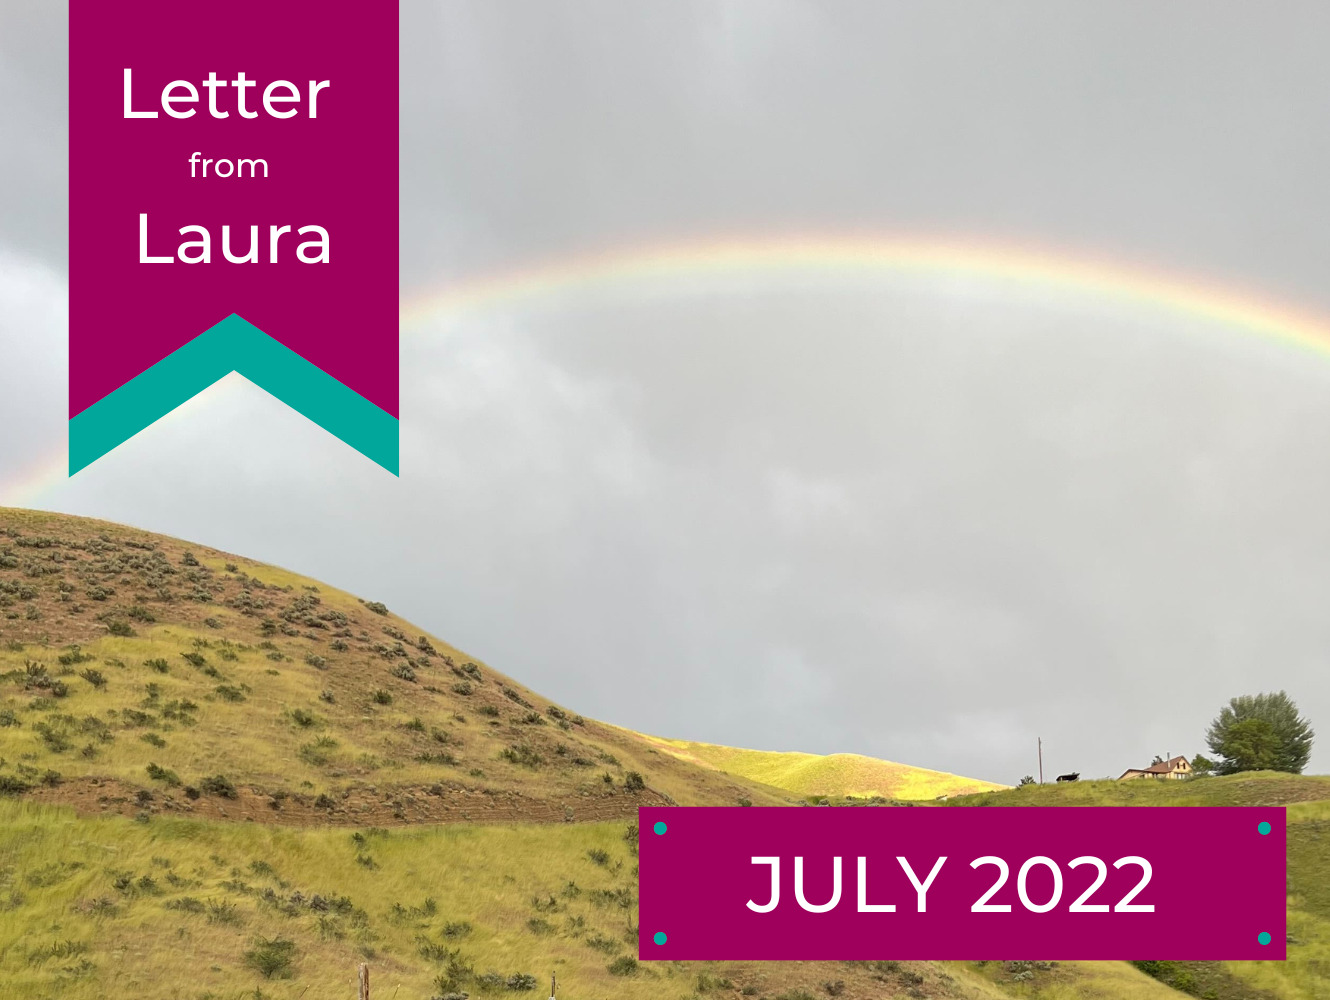 Letter from Laura July 2022. A green hillside with a small house and tree on top is covered by a wide rainbow.